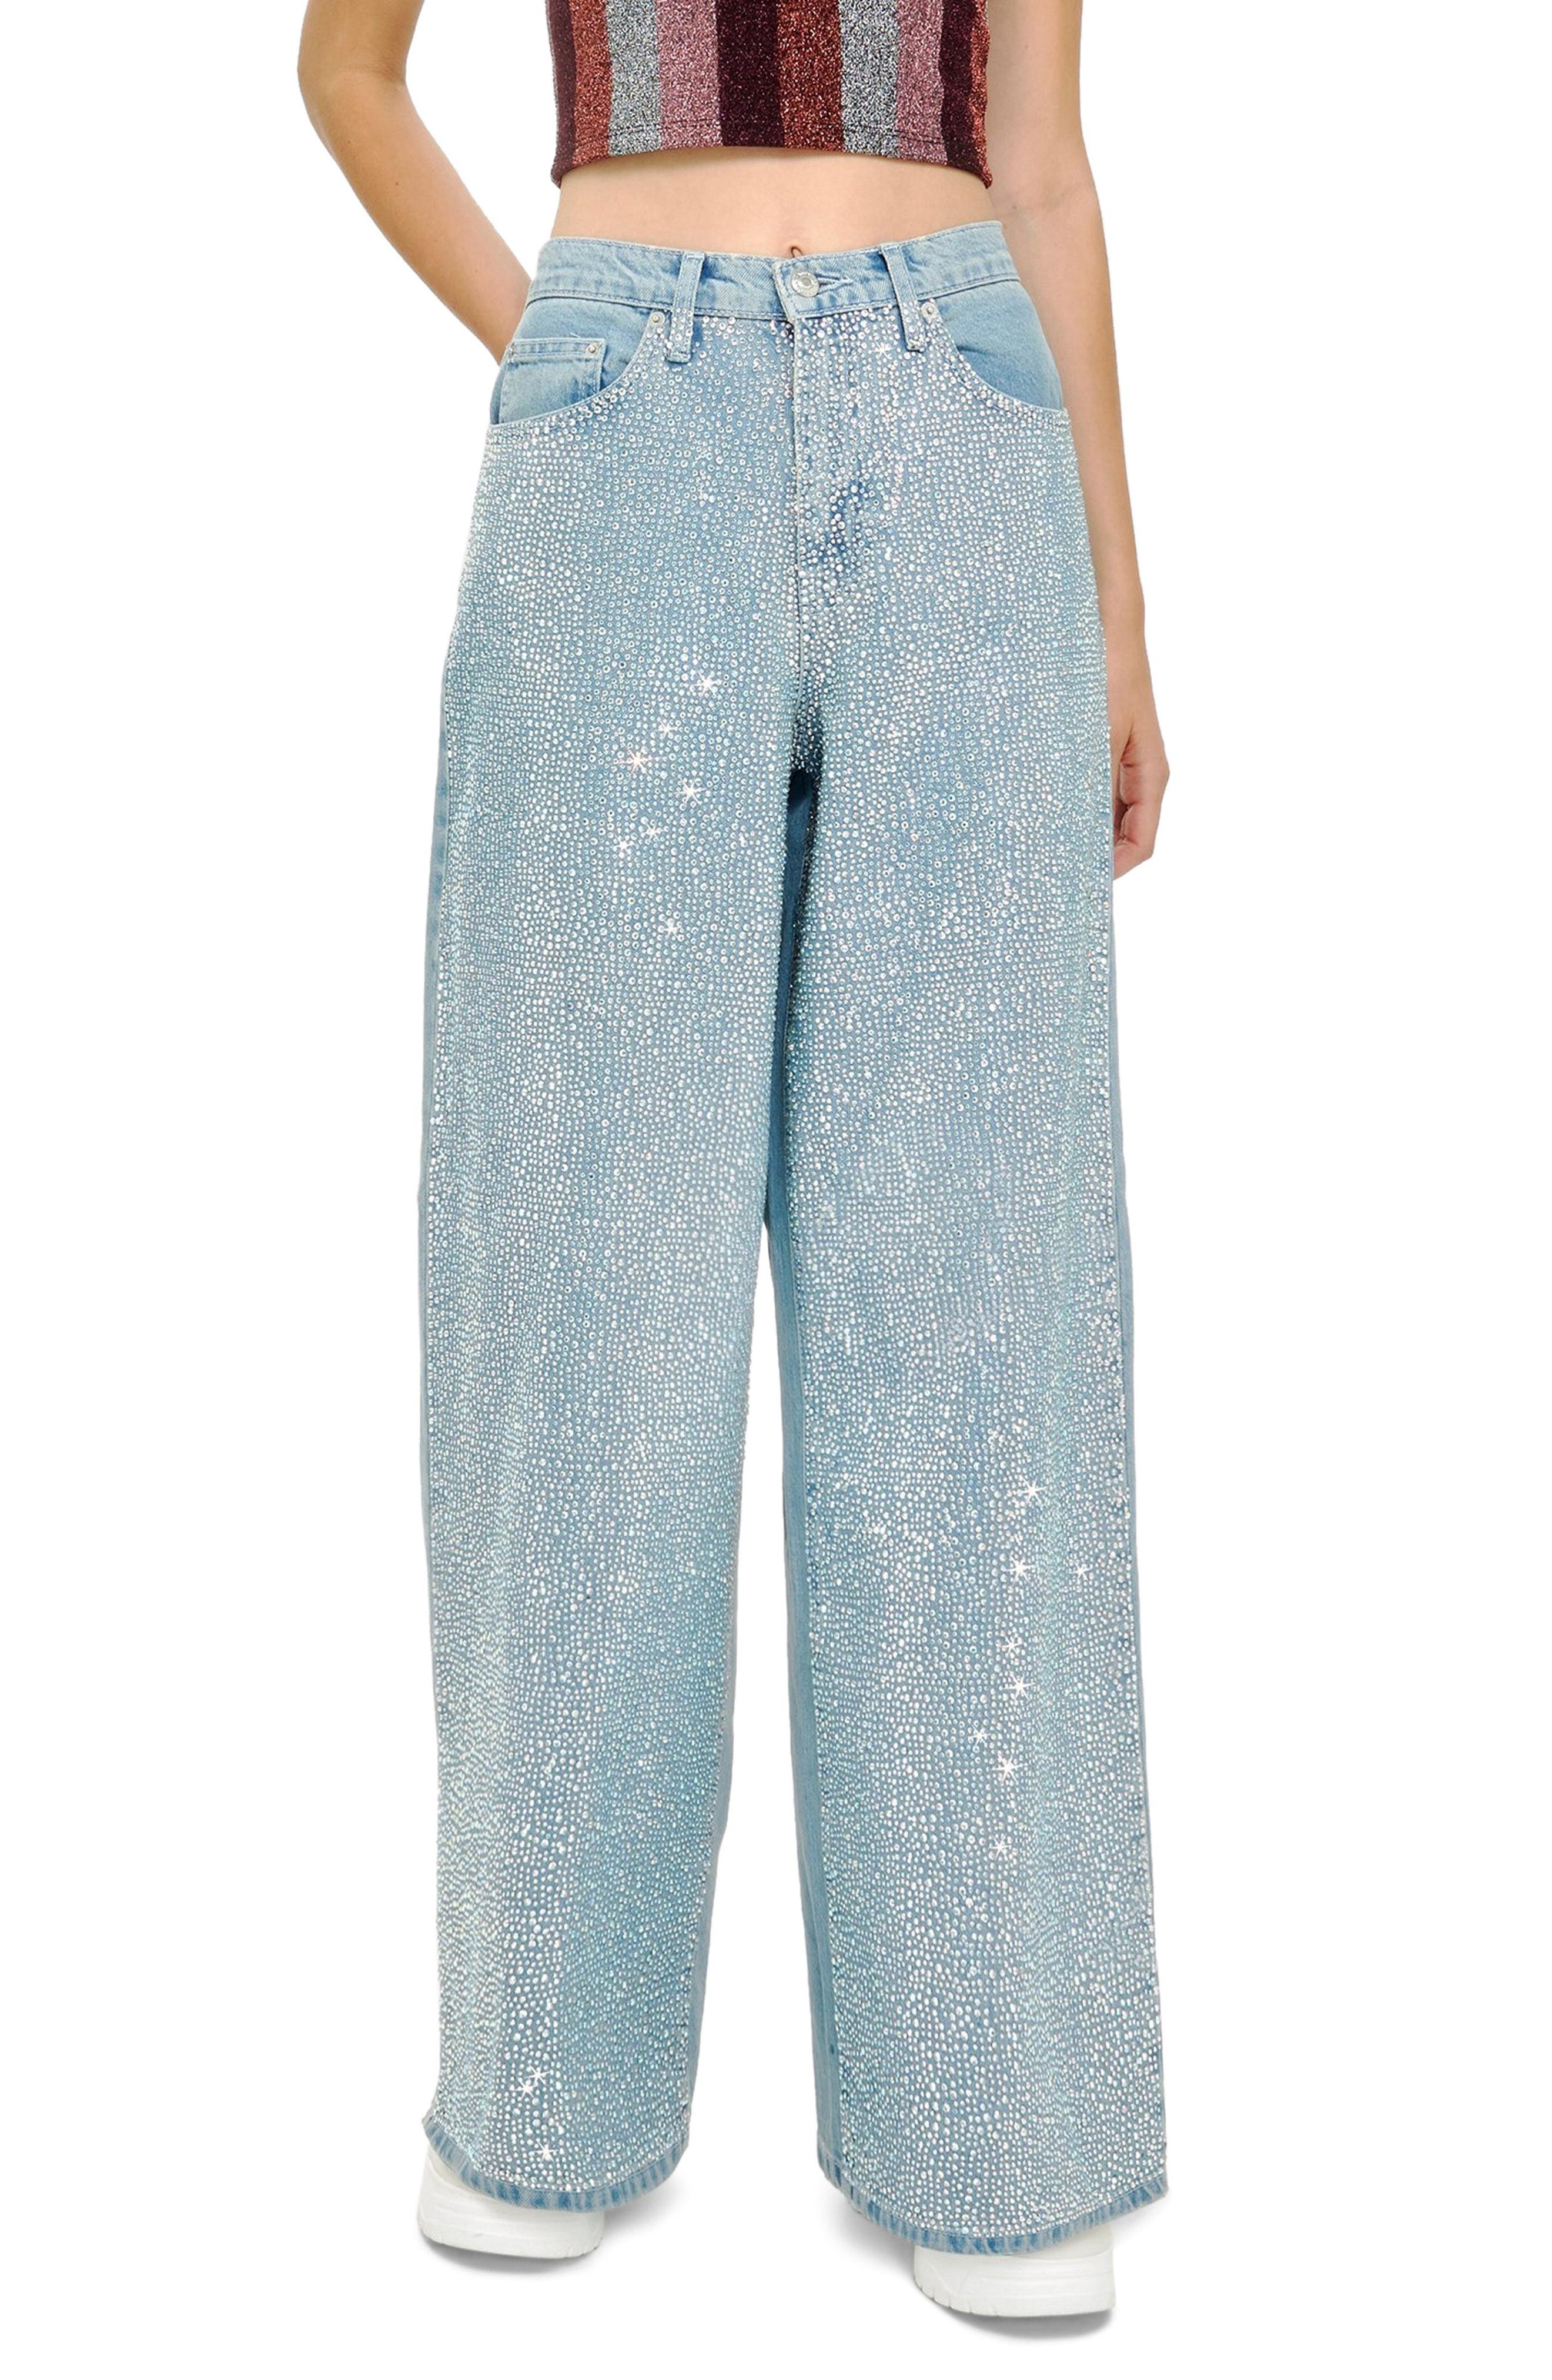 topshop sparkly jeans